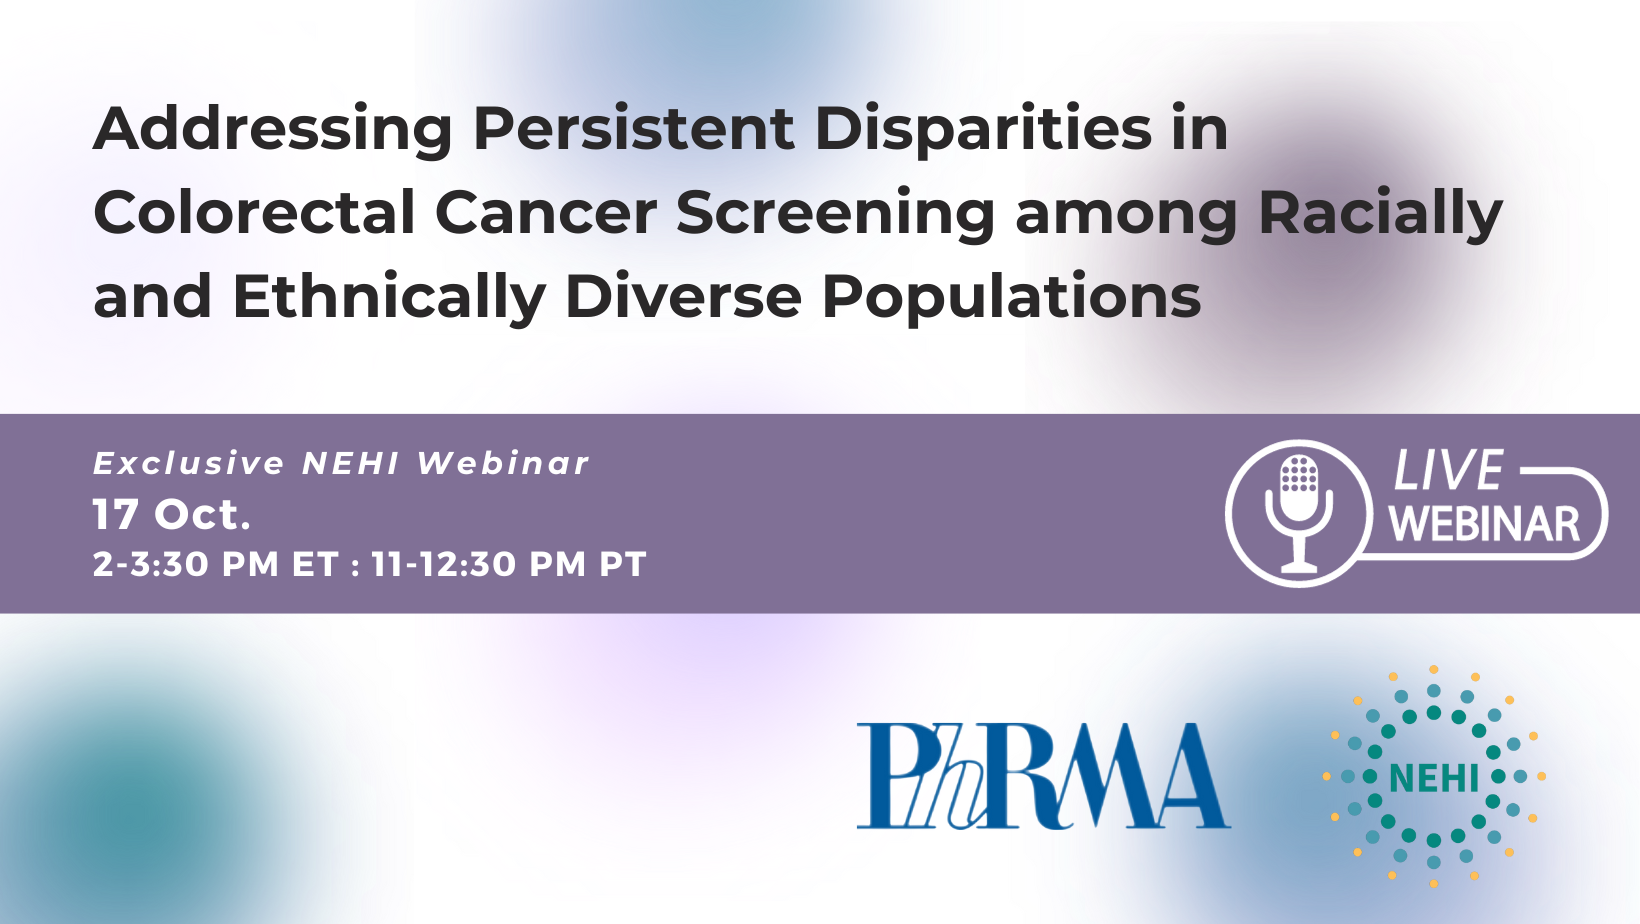 Addressing Persistent Disparities in Colorectal Cancer Screening Among Racially and Ethnically Diverse Populations